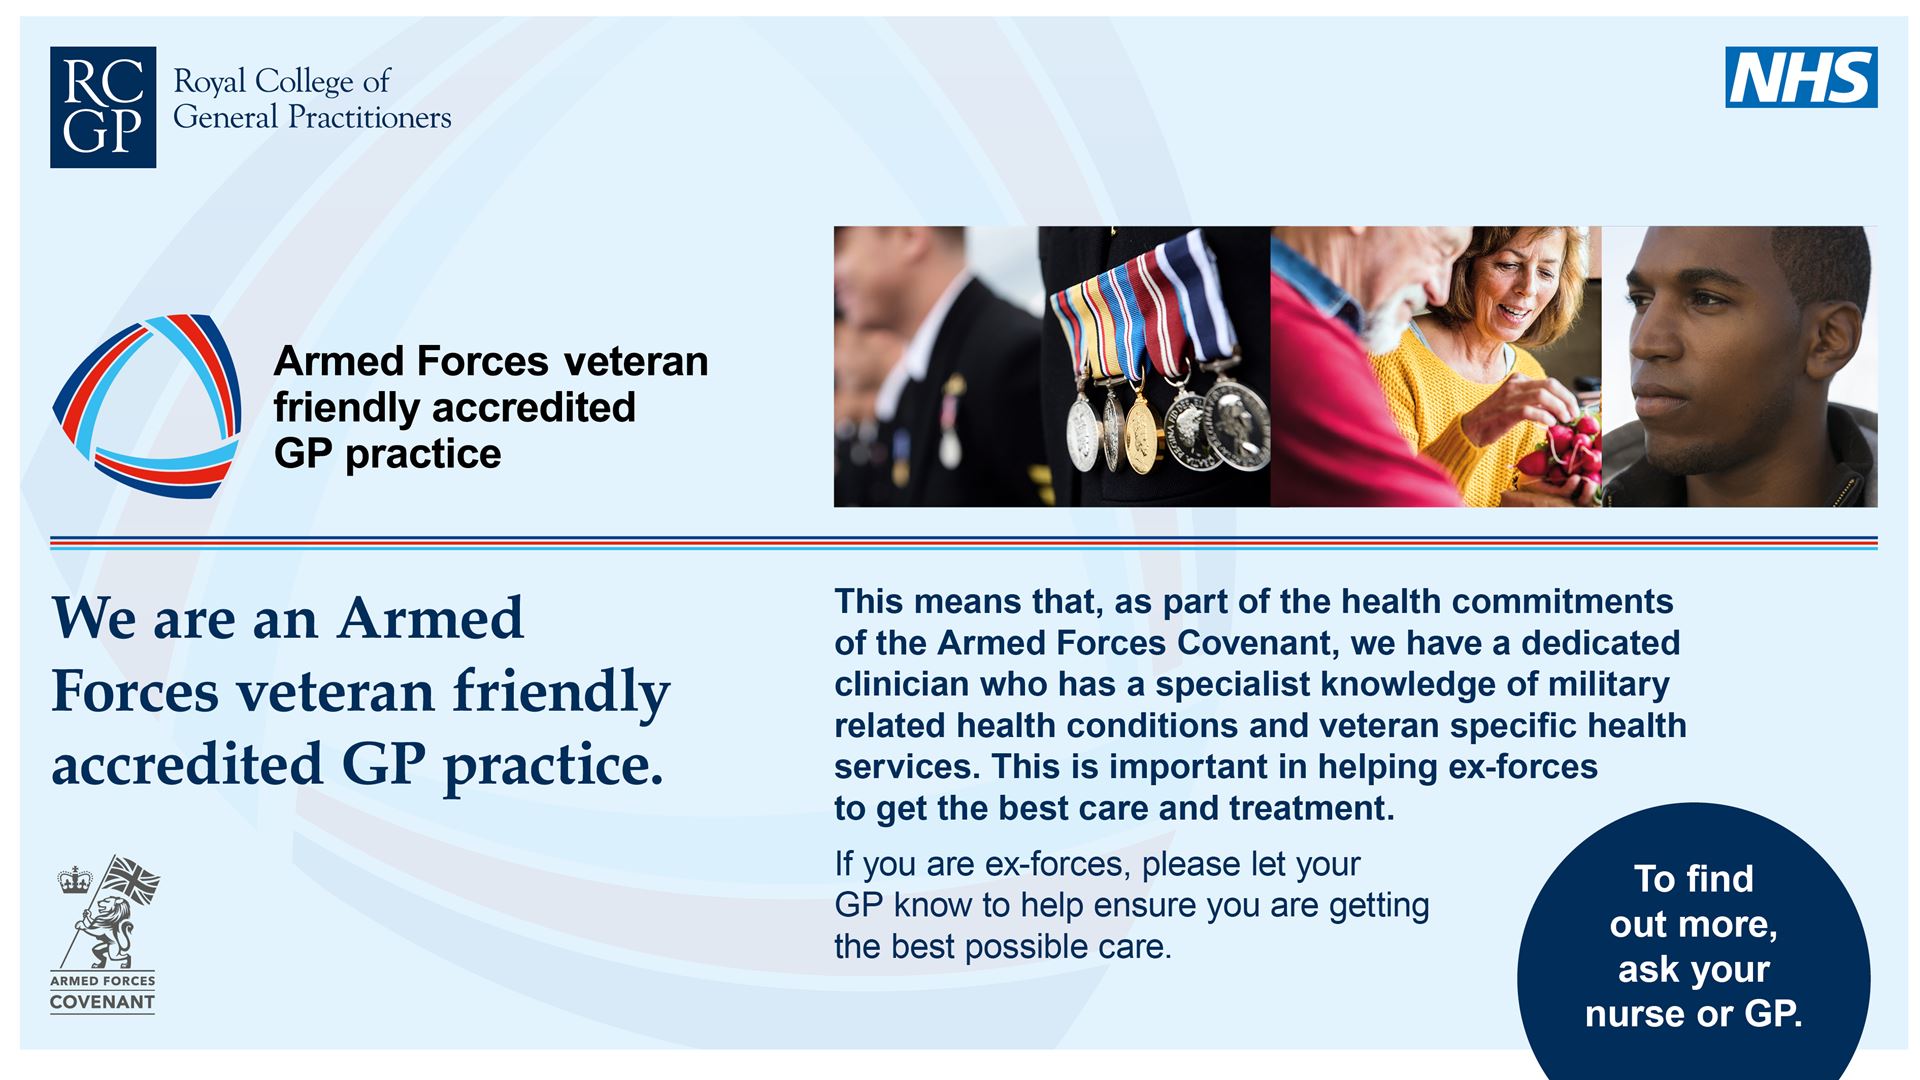 Armed forces veteran friendly information